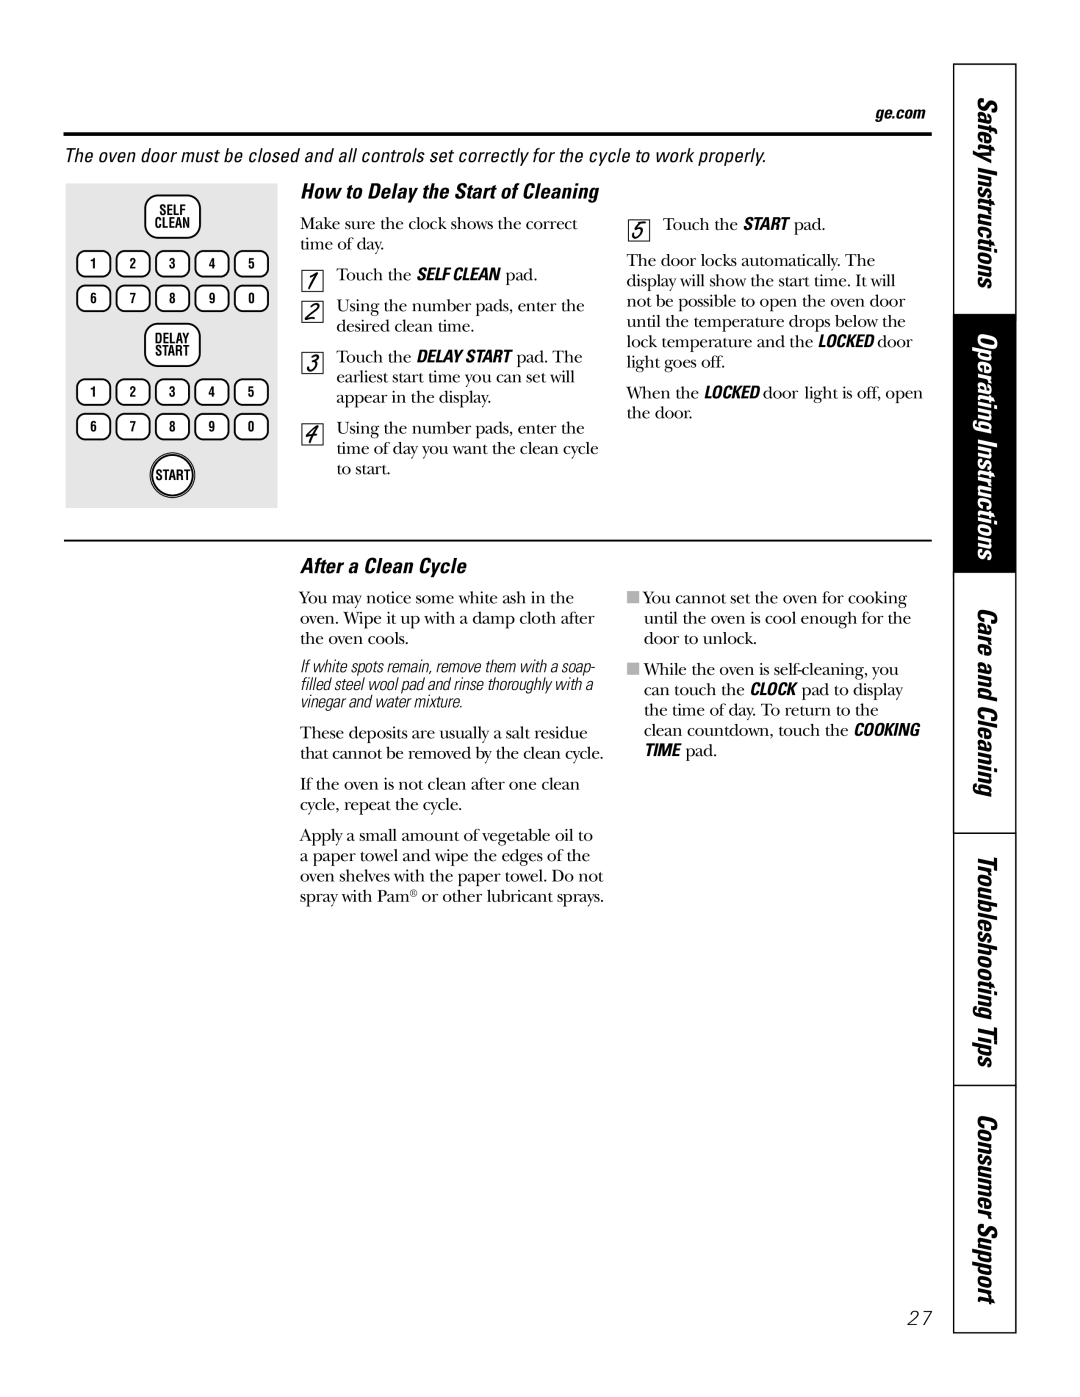 GE JBP74 owner manual Instructions Operating Instructions, After a Clean Cycle, How to Delay the Start of Cleaning, Safety 